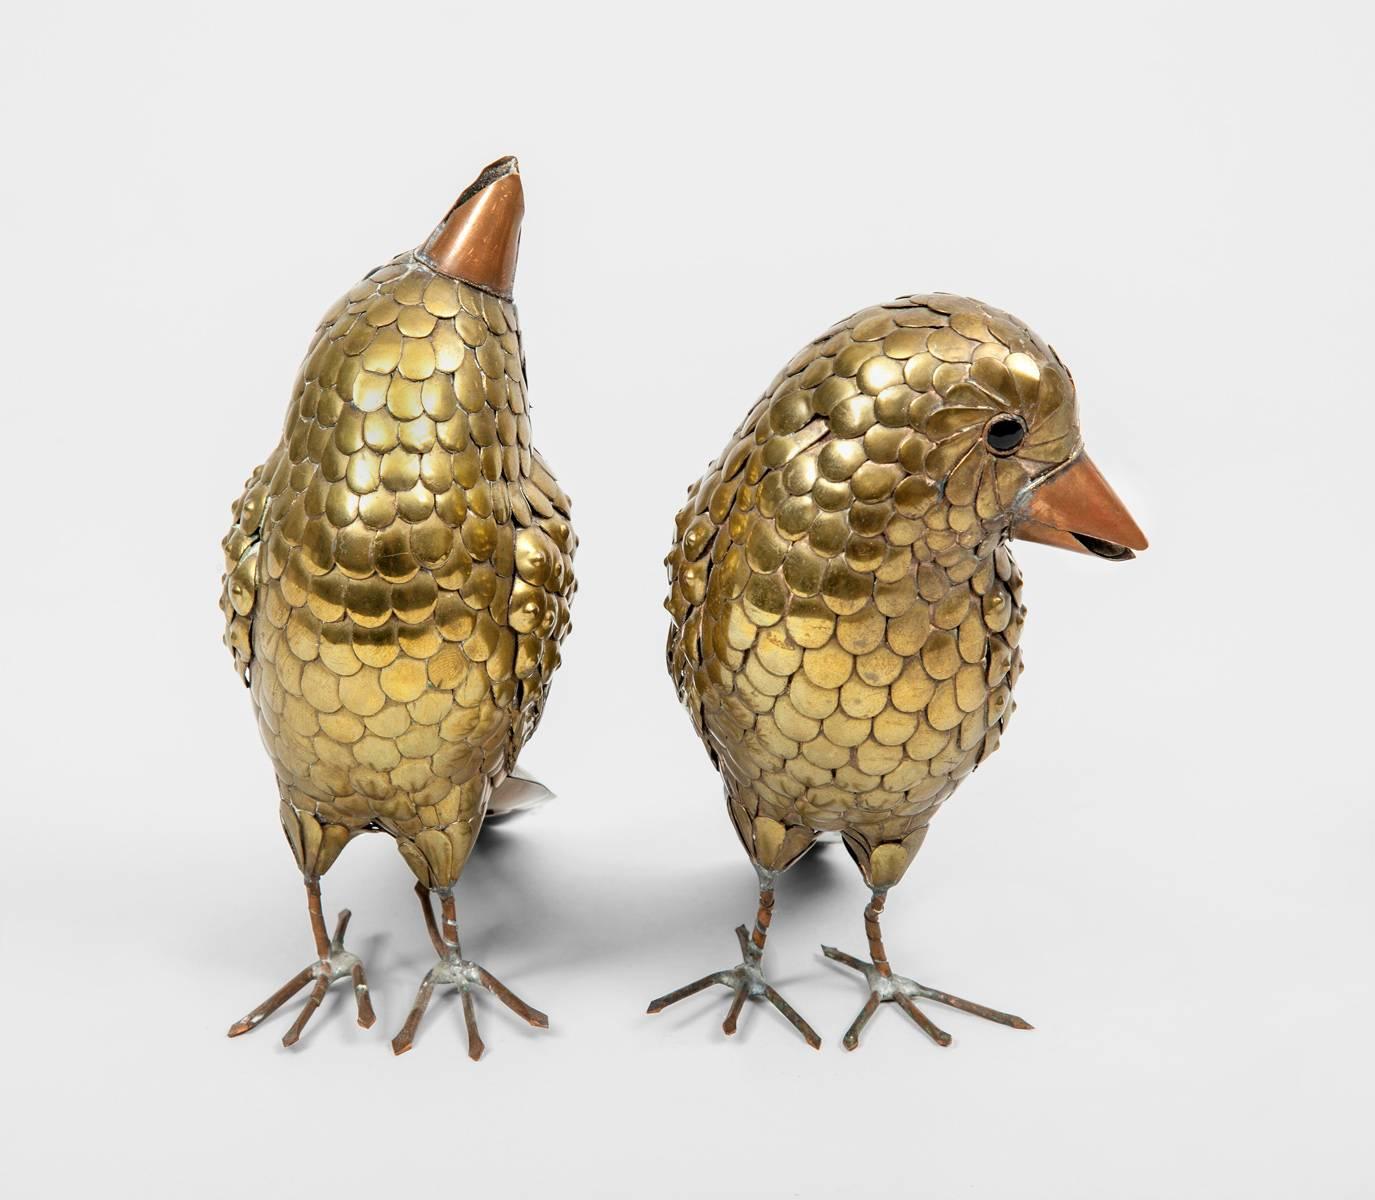 Pair of brass birds by Mexican artist Sergio Bustamante with copper beaks and feet.